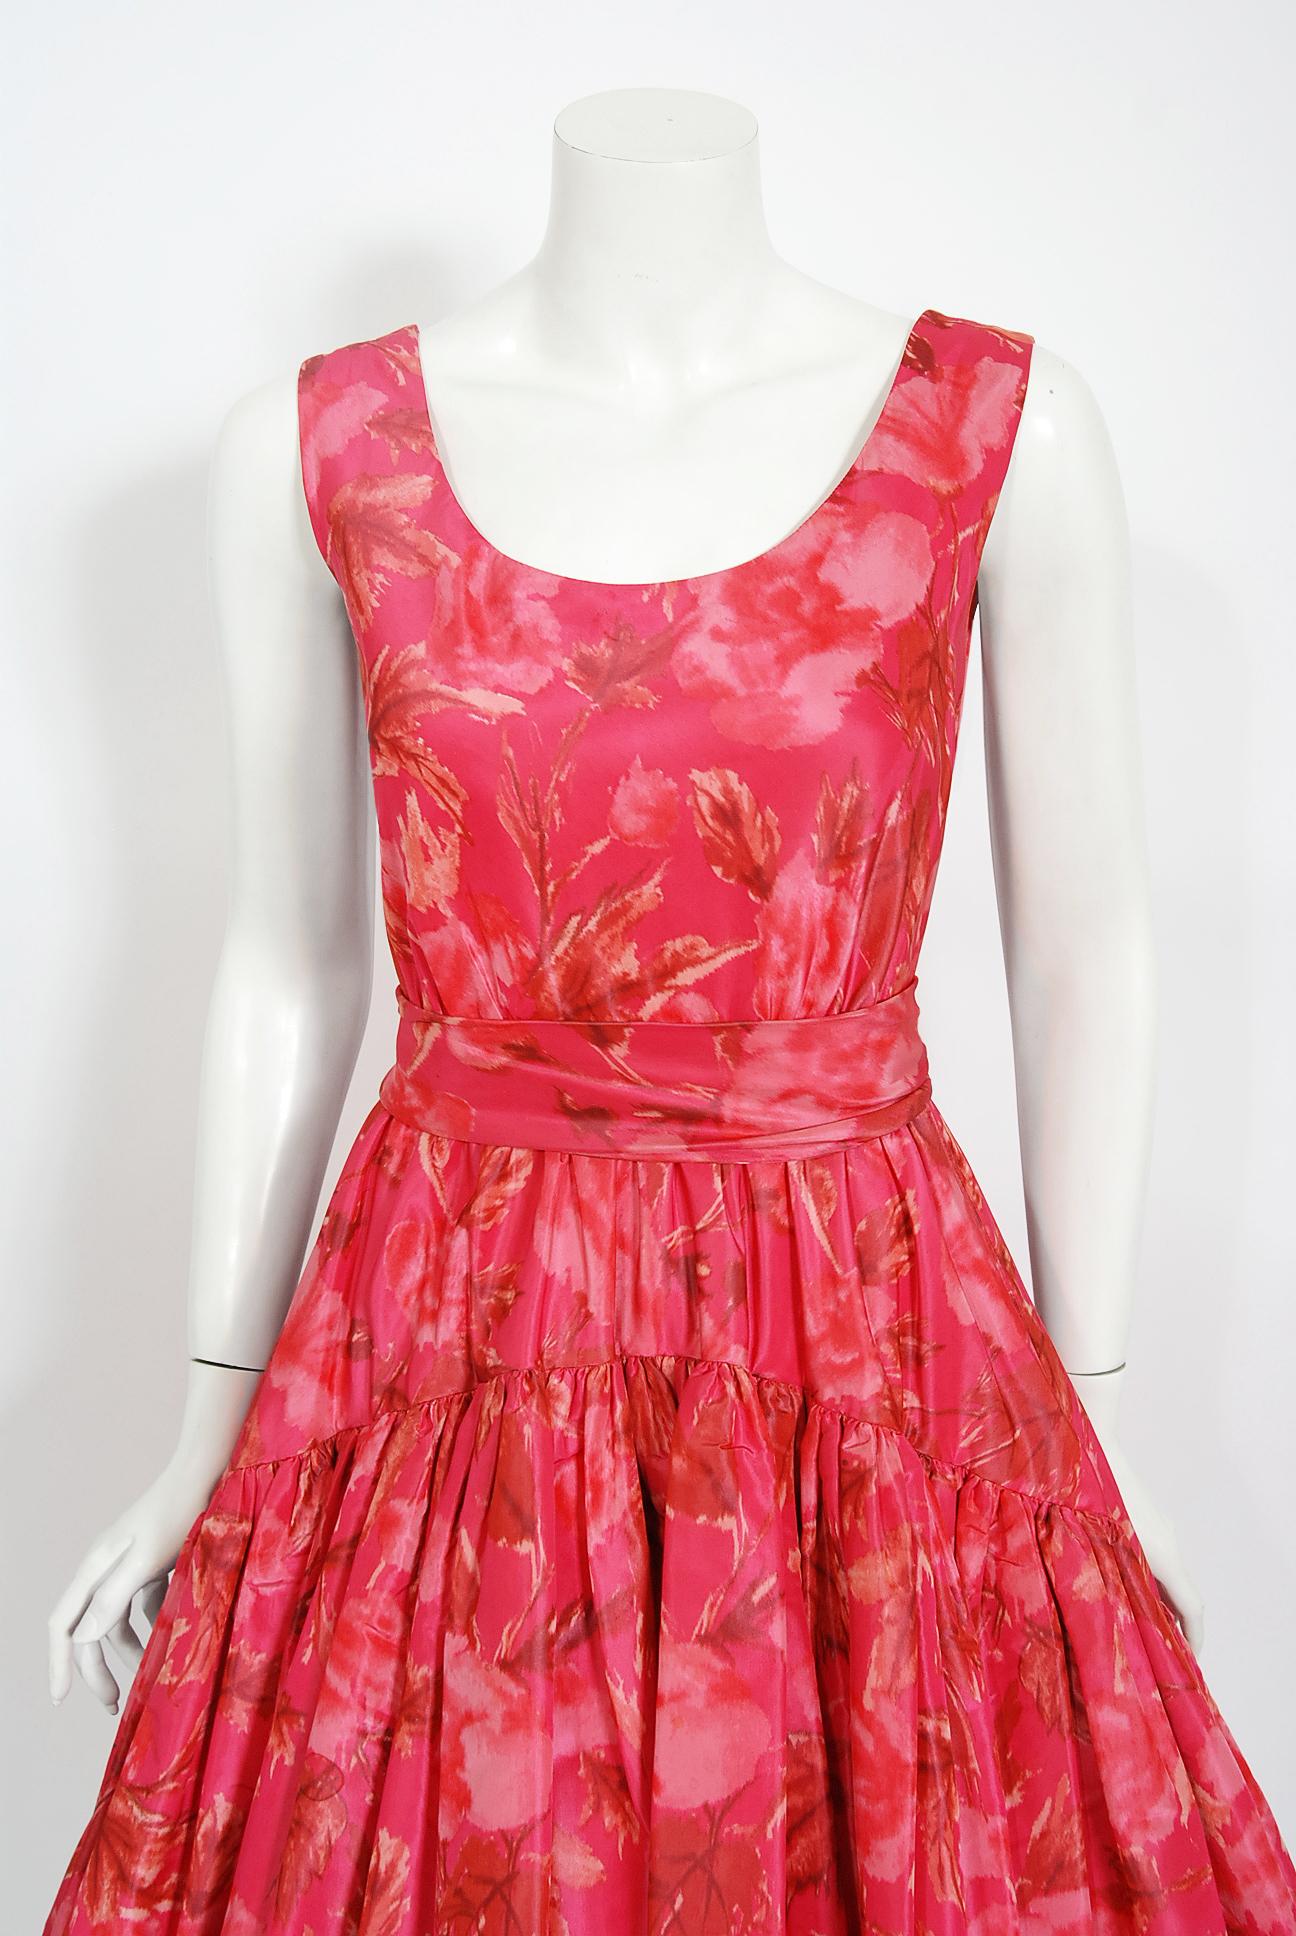 In this gorgeous 1950's rose-pink party dress, the detailed construction and meticulous attention to detail are comparable to what you will find in modern couture. The garment is fashioned in high quality mid-weight silk taffeta with the prettiest